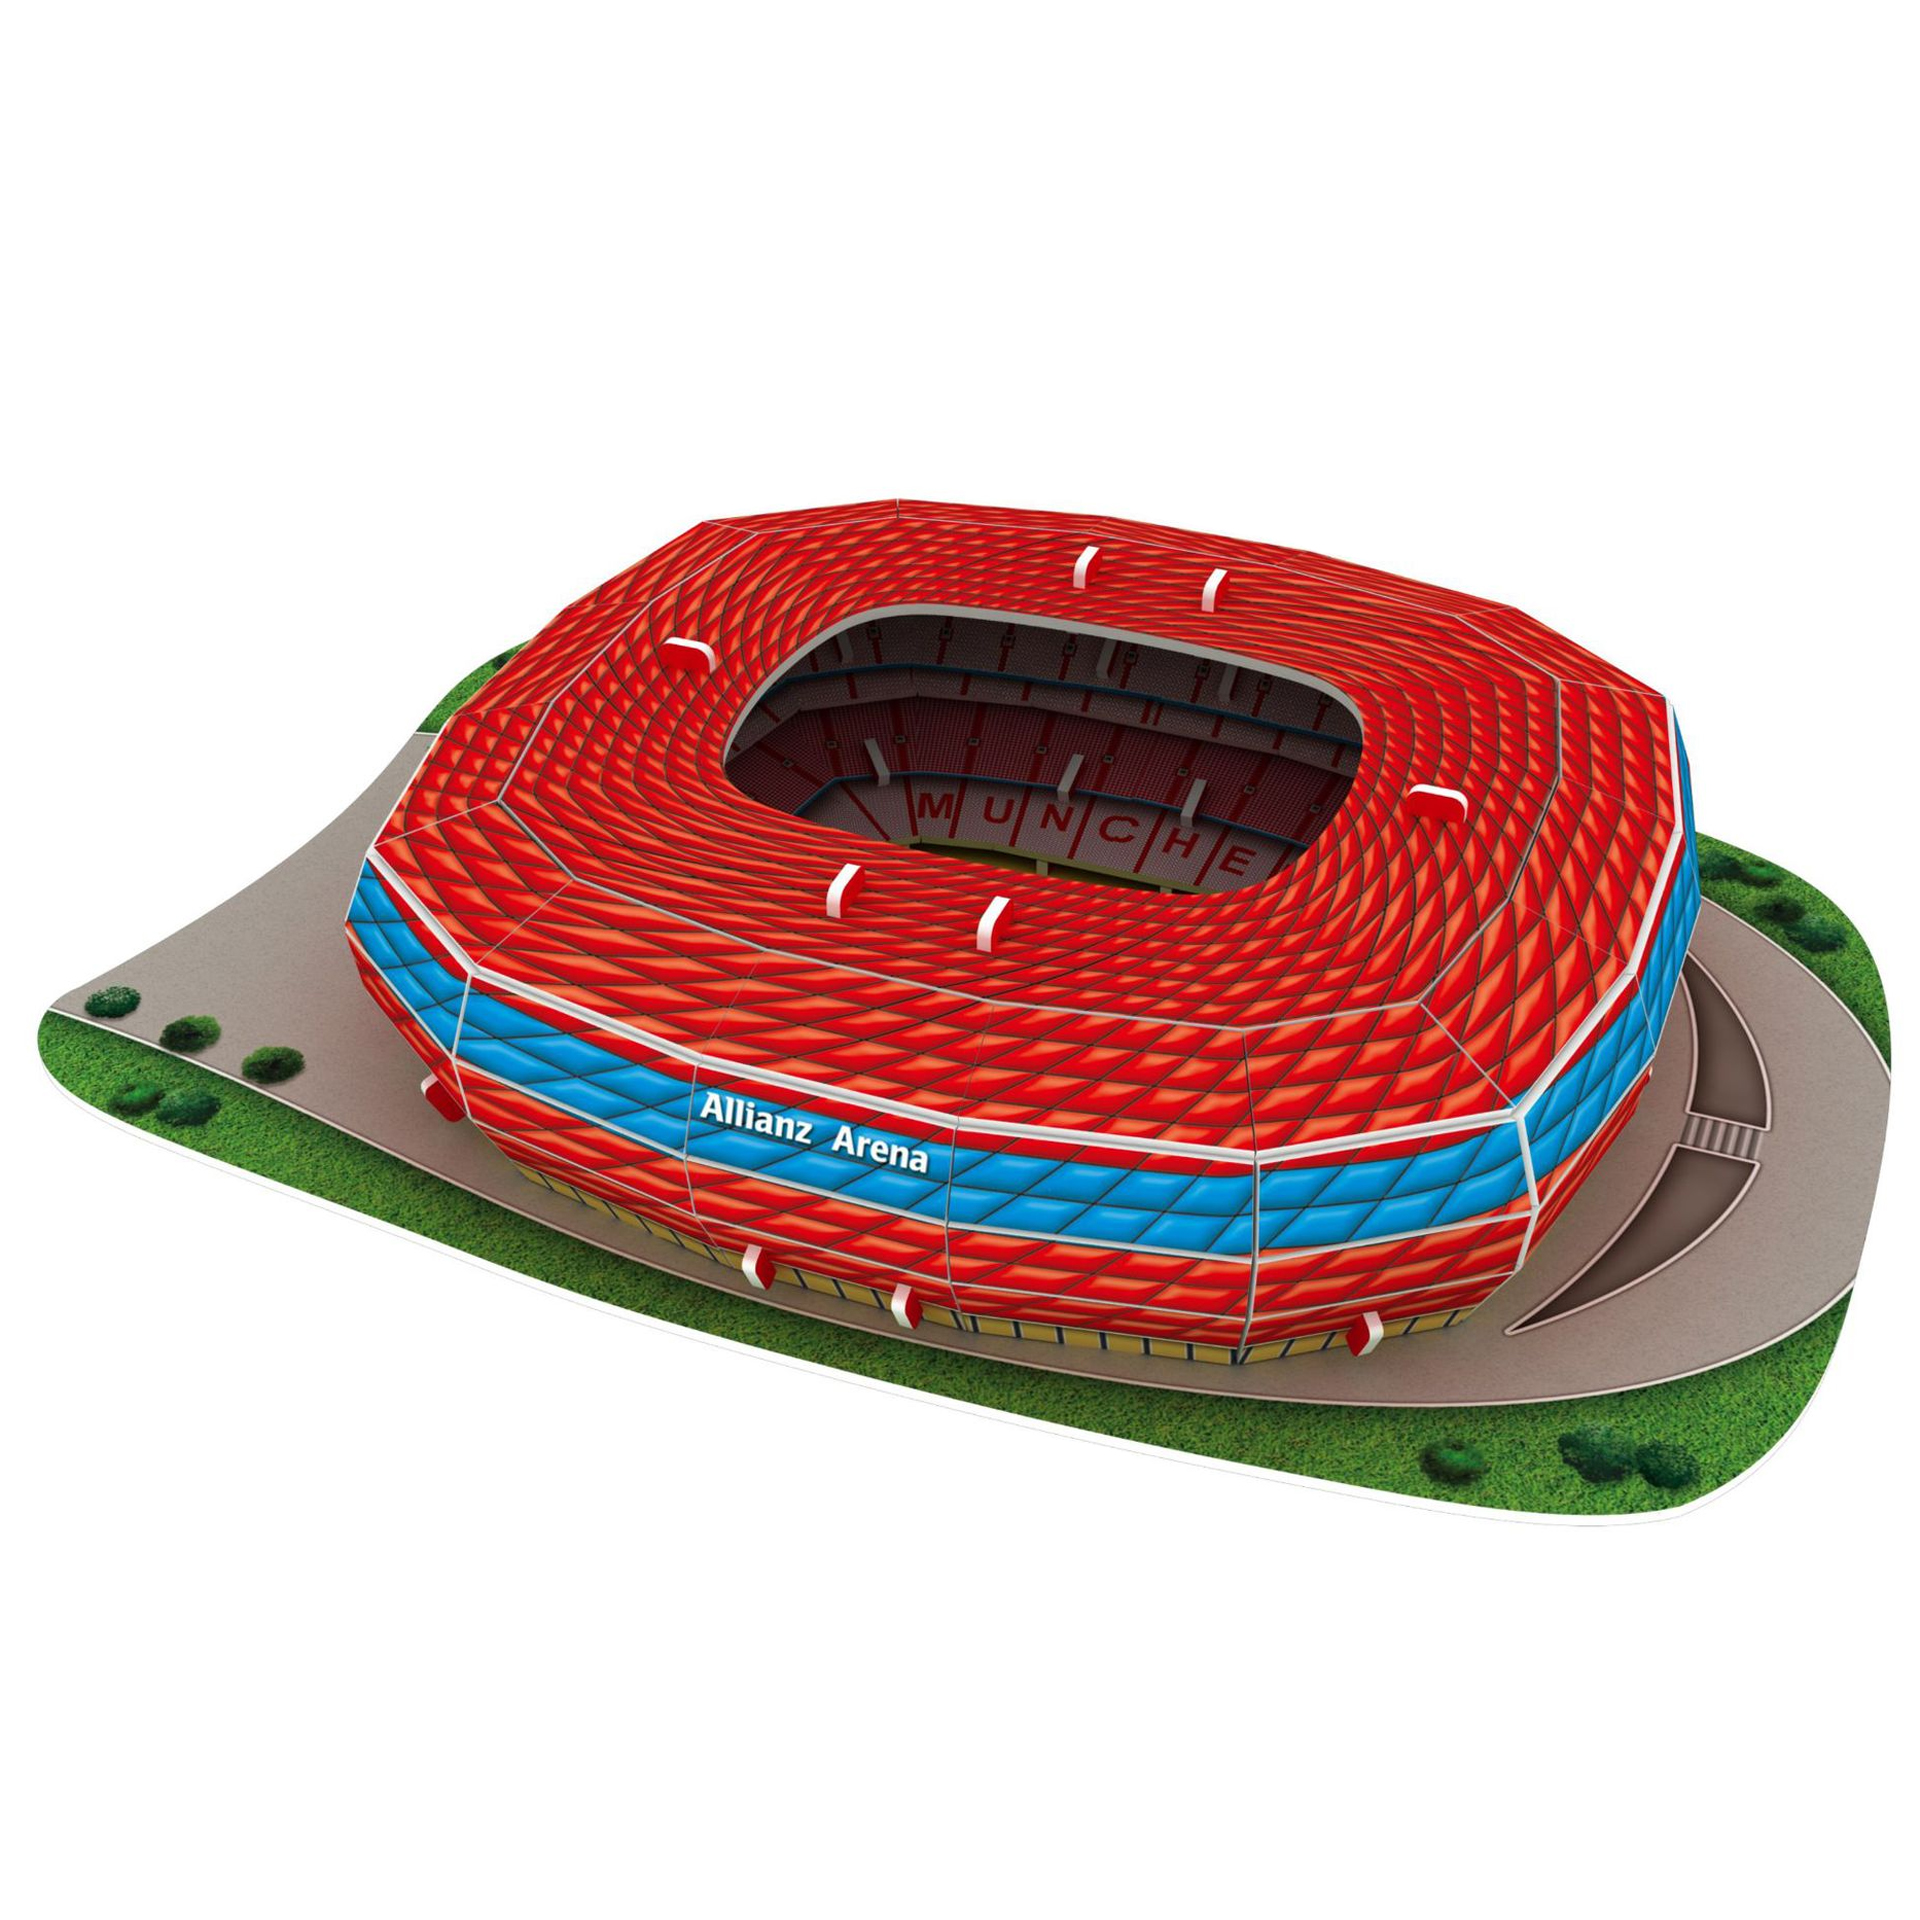 3D Puzzle Football Stadiums Wooden Puzzle Toy Game Assembly Popular San  Diego/Allianz Munich/San Siro/Italy Gifts For Kids Adult X0522 From  Musuo05, $14.72